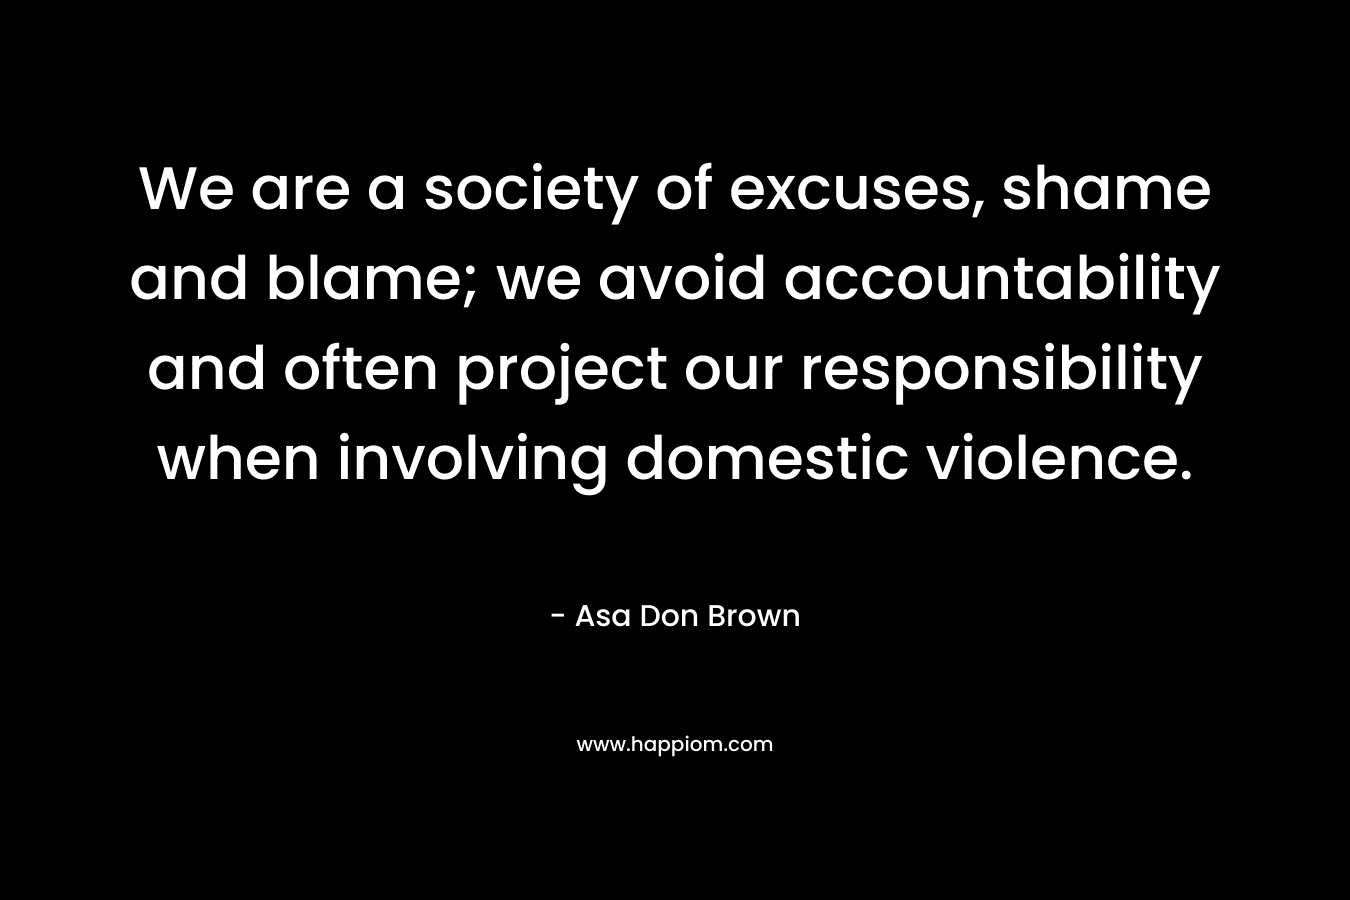 We are a society of excuses, shame and blame; we avoid accountability and often project our responsibility when involving domestic violence. – Asa Don Brown